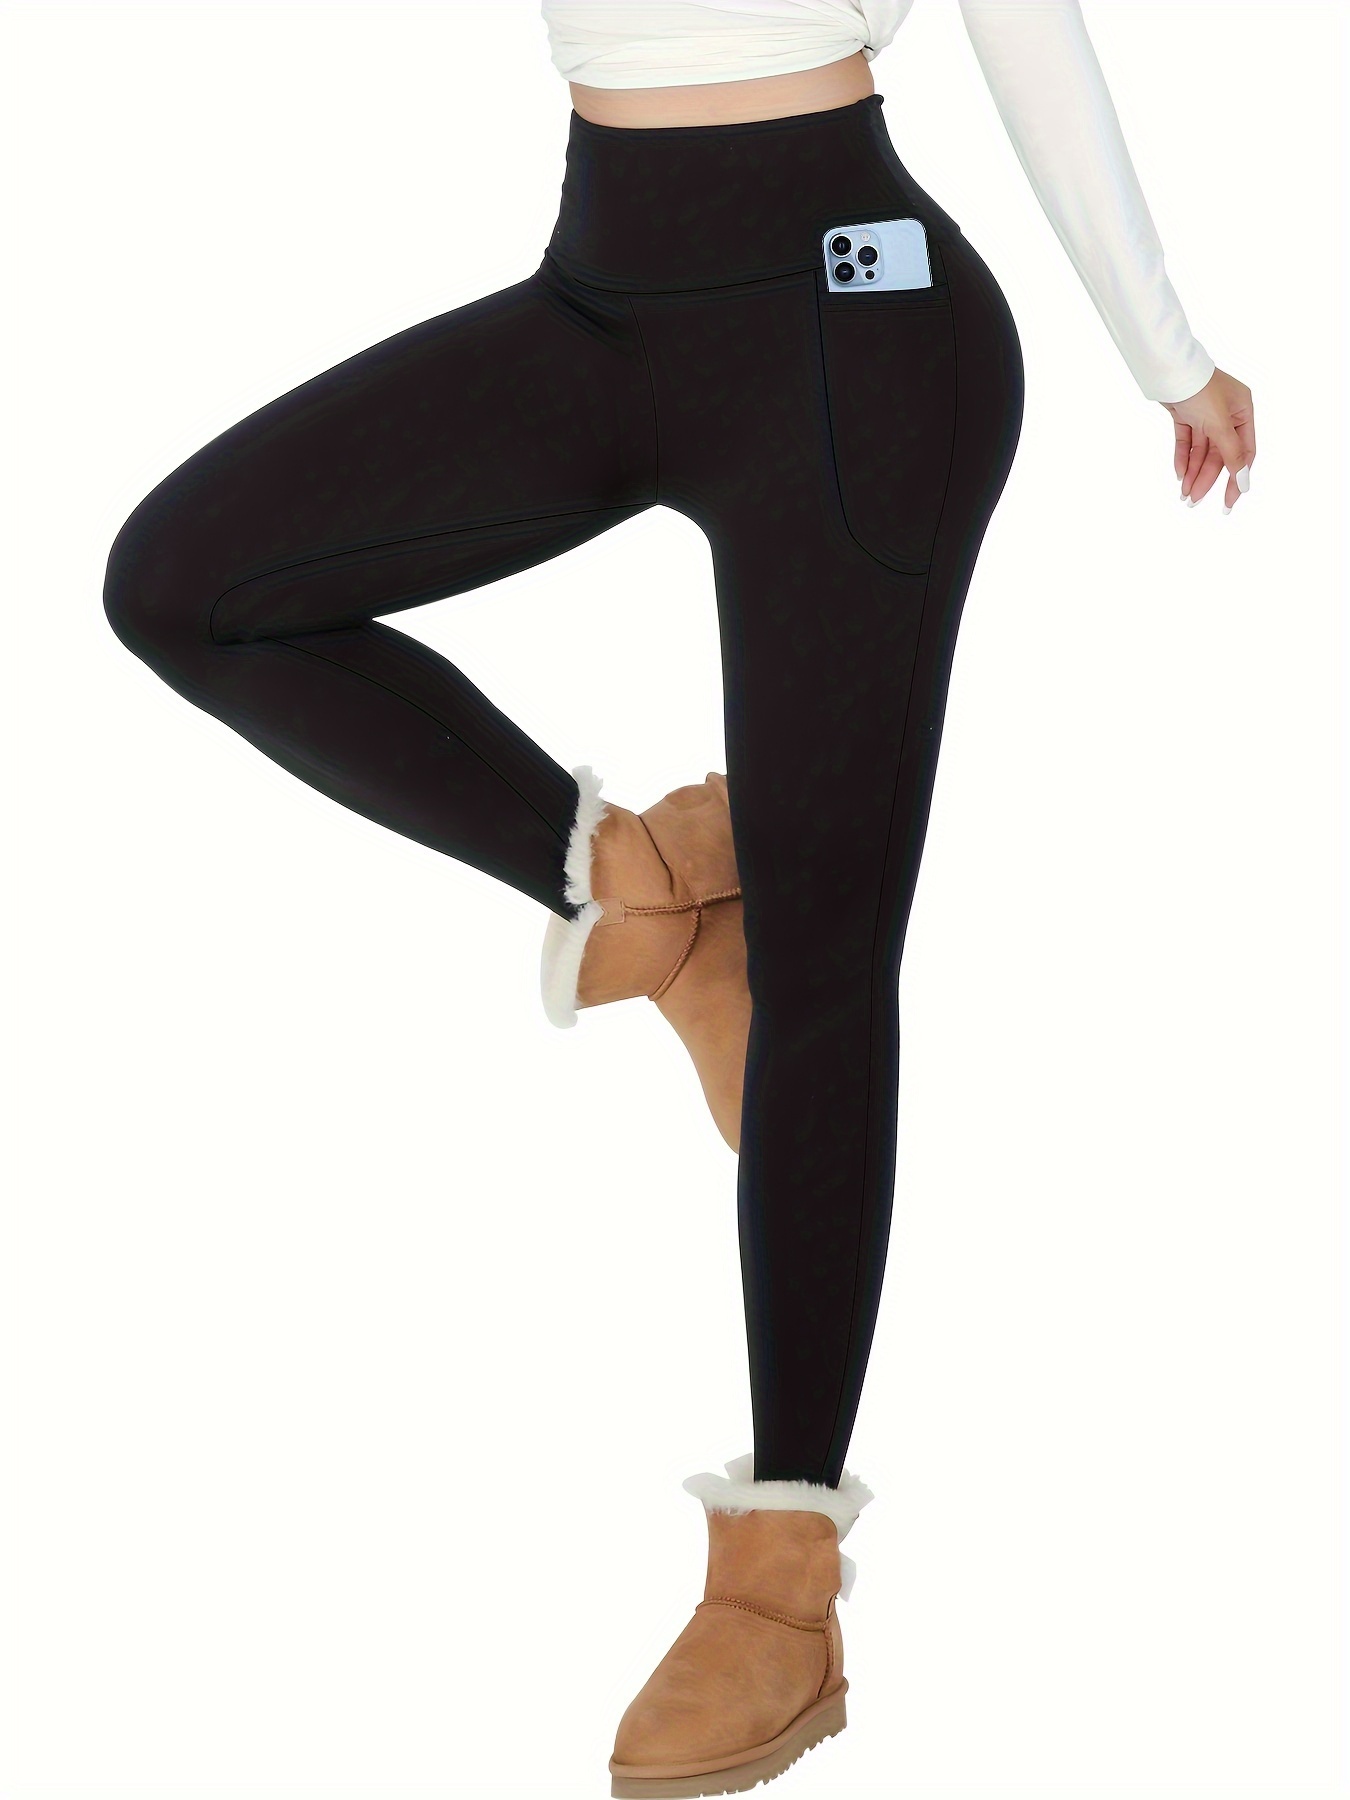 Winter Fleece-Lined Leggings For Women Warm Thermal Push Up Tights Gym Wear  Workout Pants Seamless Yoga Trousers With Pocket - AliExpress